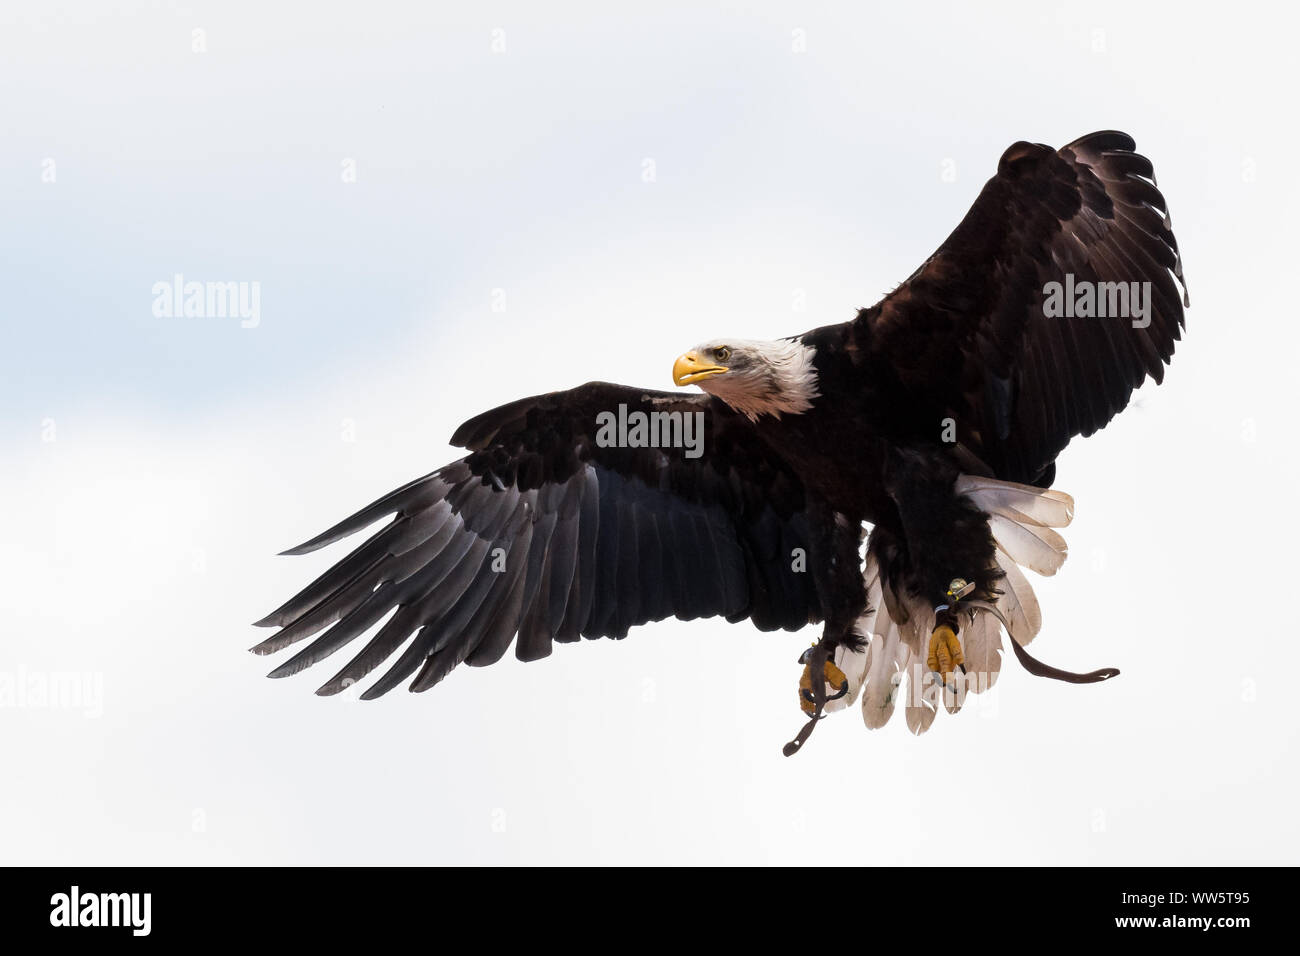 Bald eagle on the wing Stock Photo